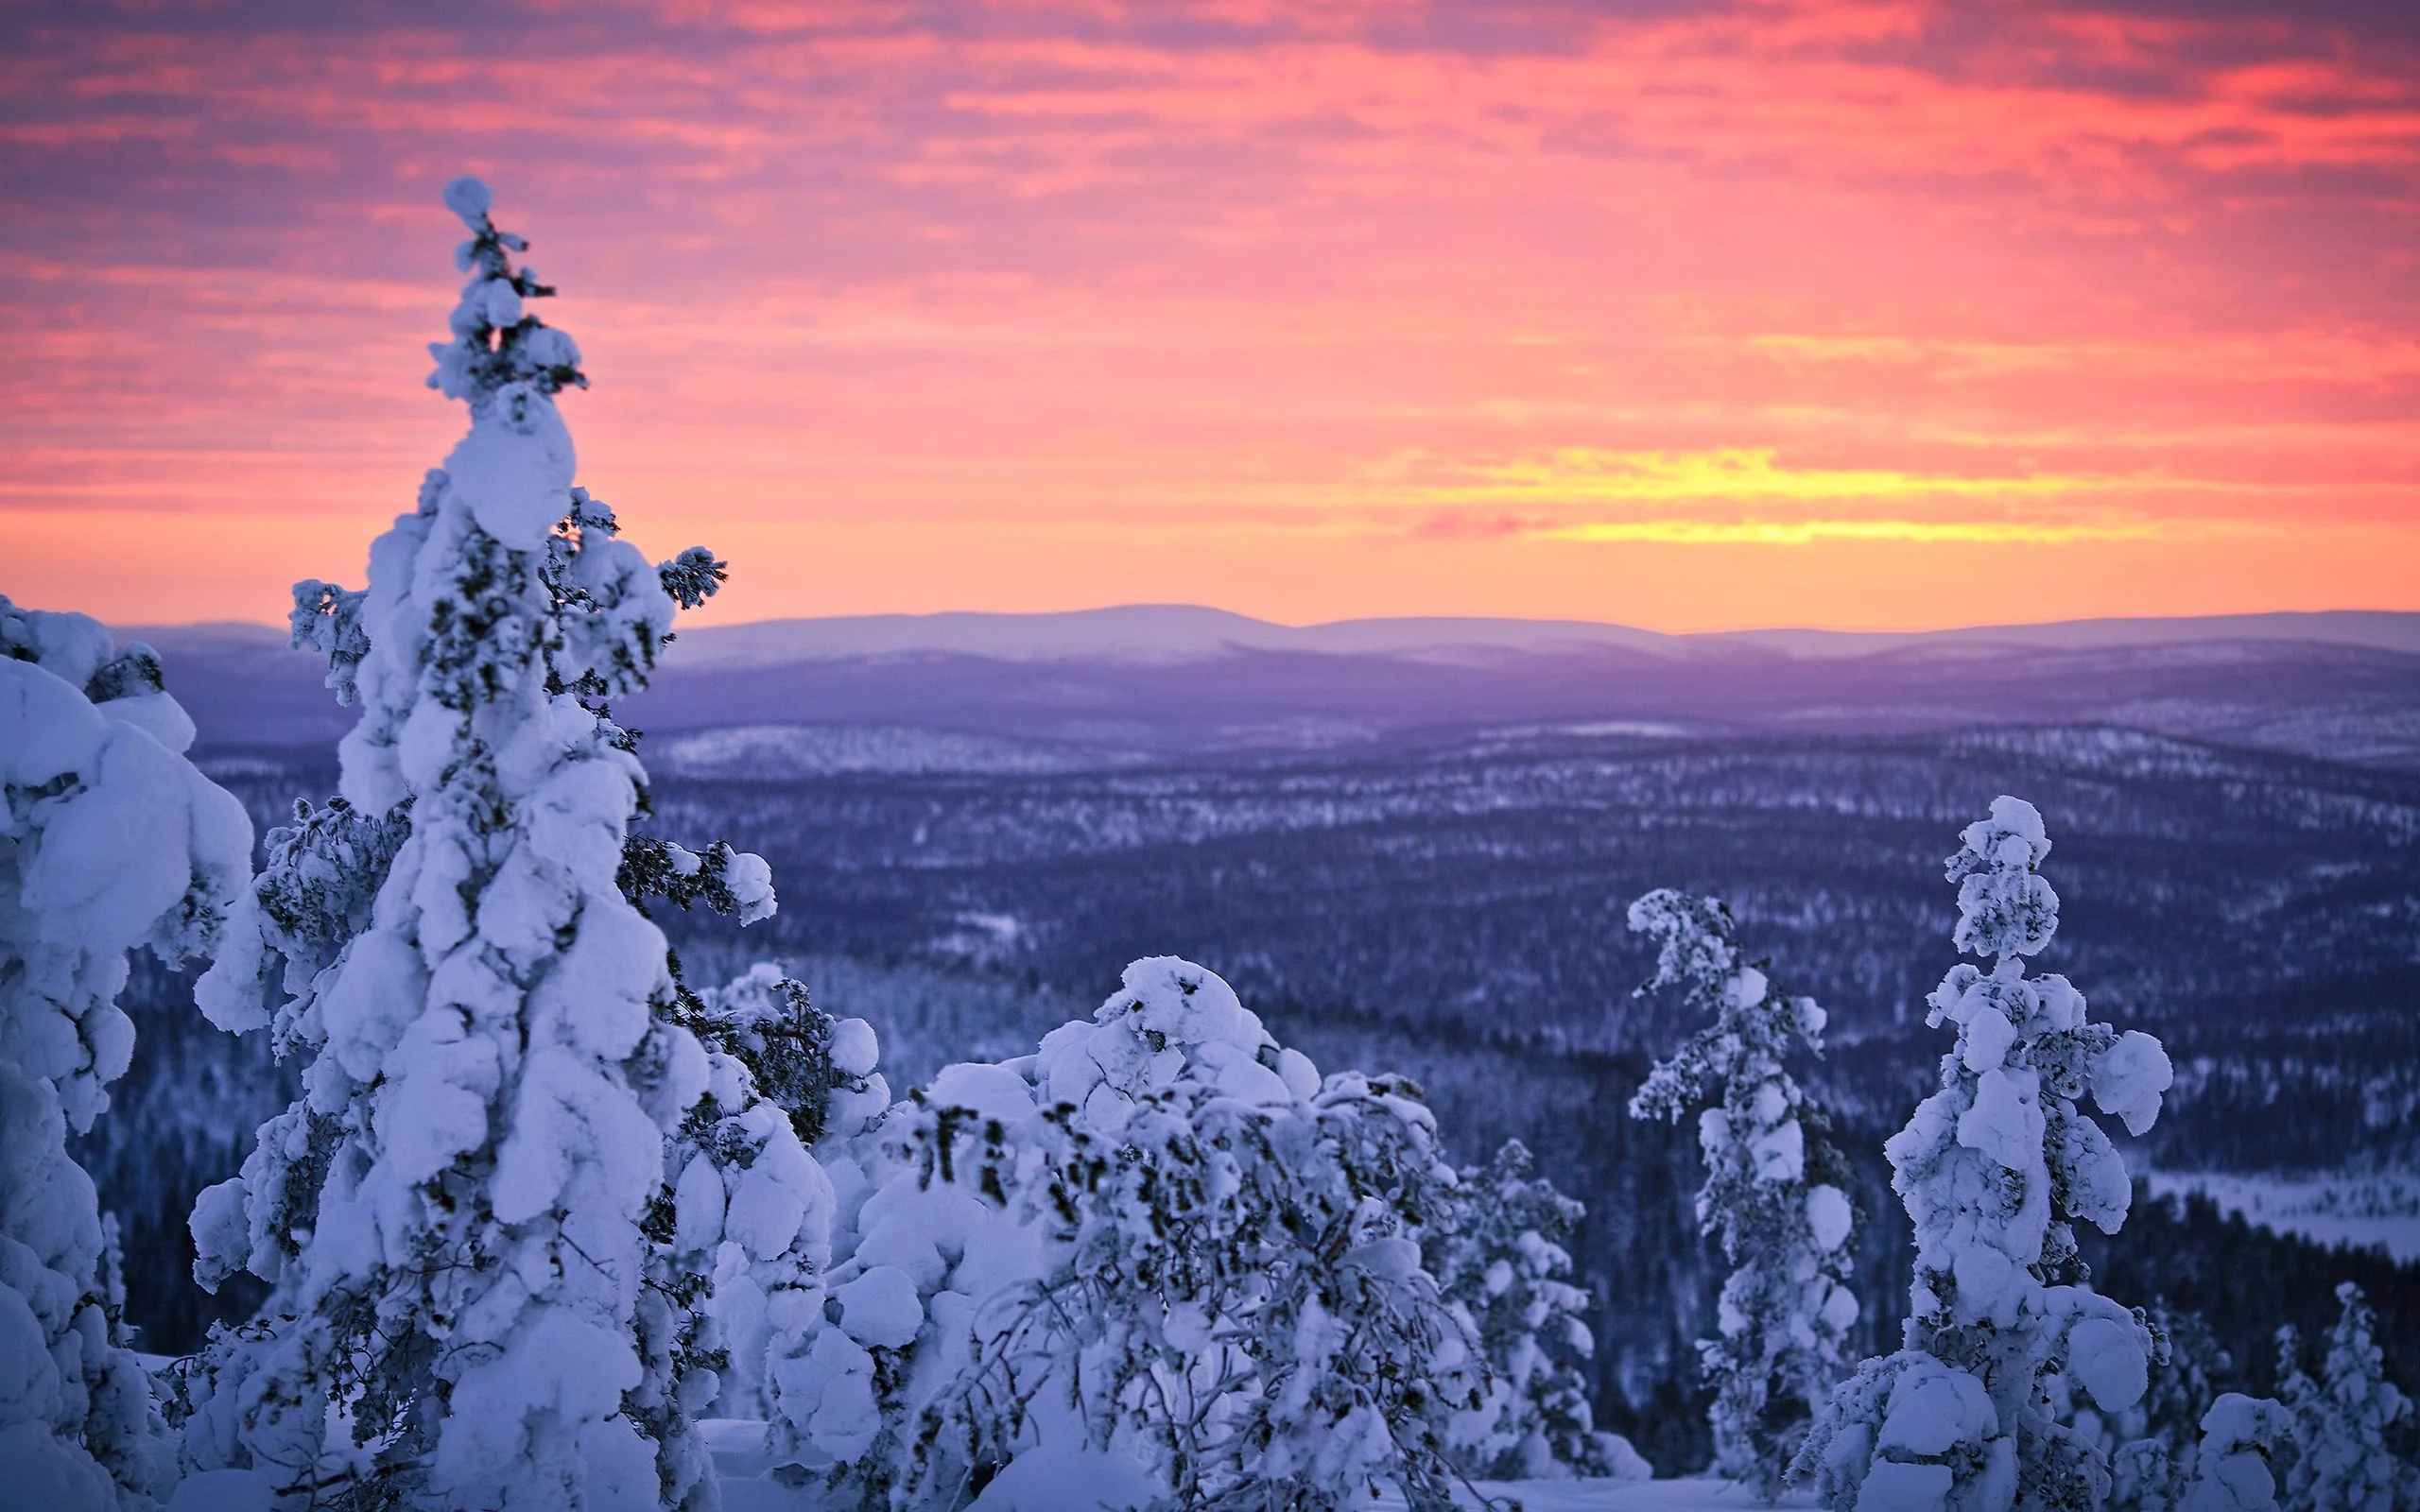 Finland: The country fought Nazi Germany in the Lapland War. 2560x1600 HD Wallpaper.